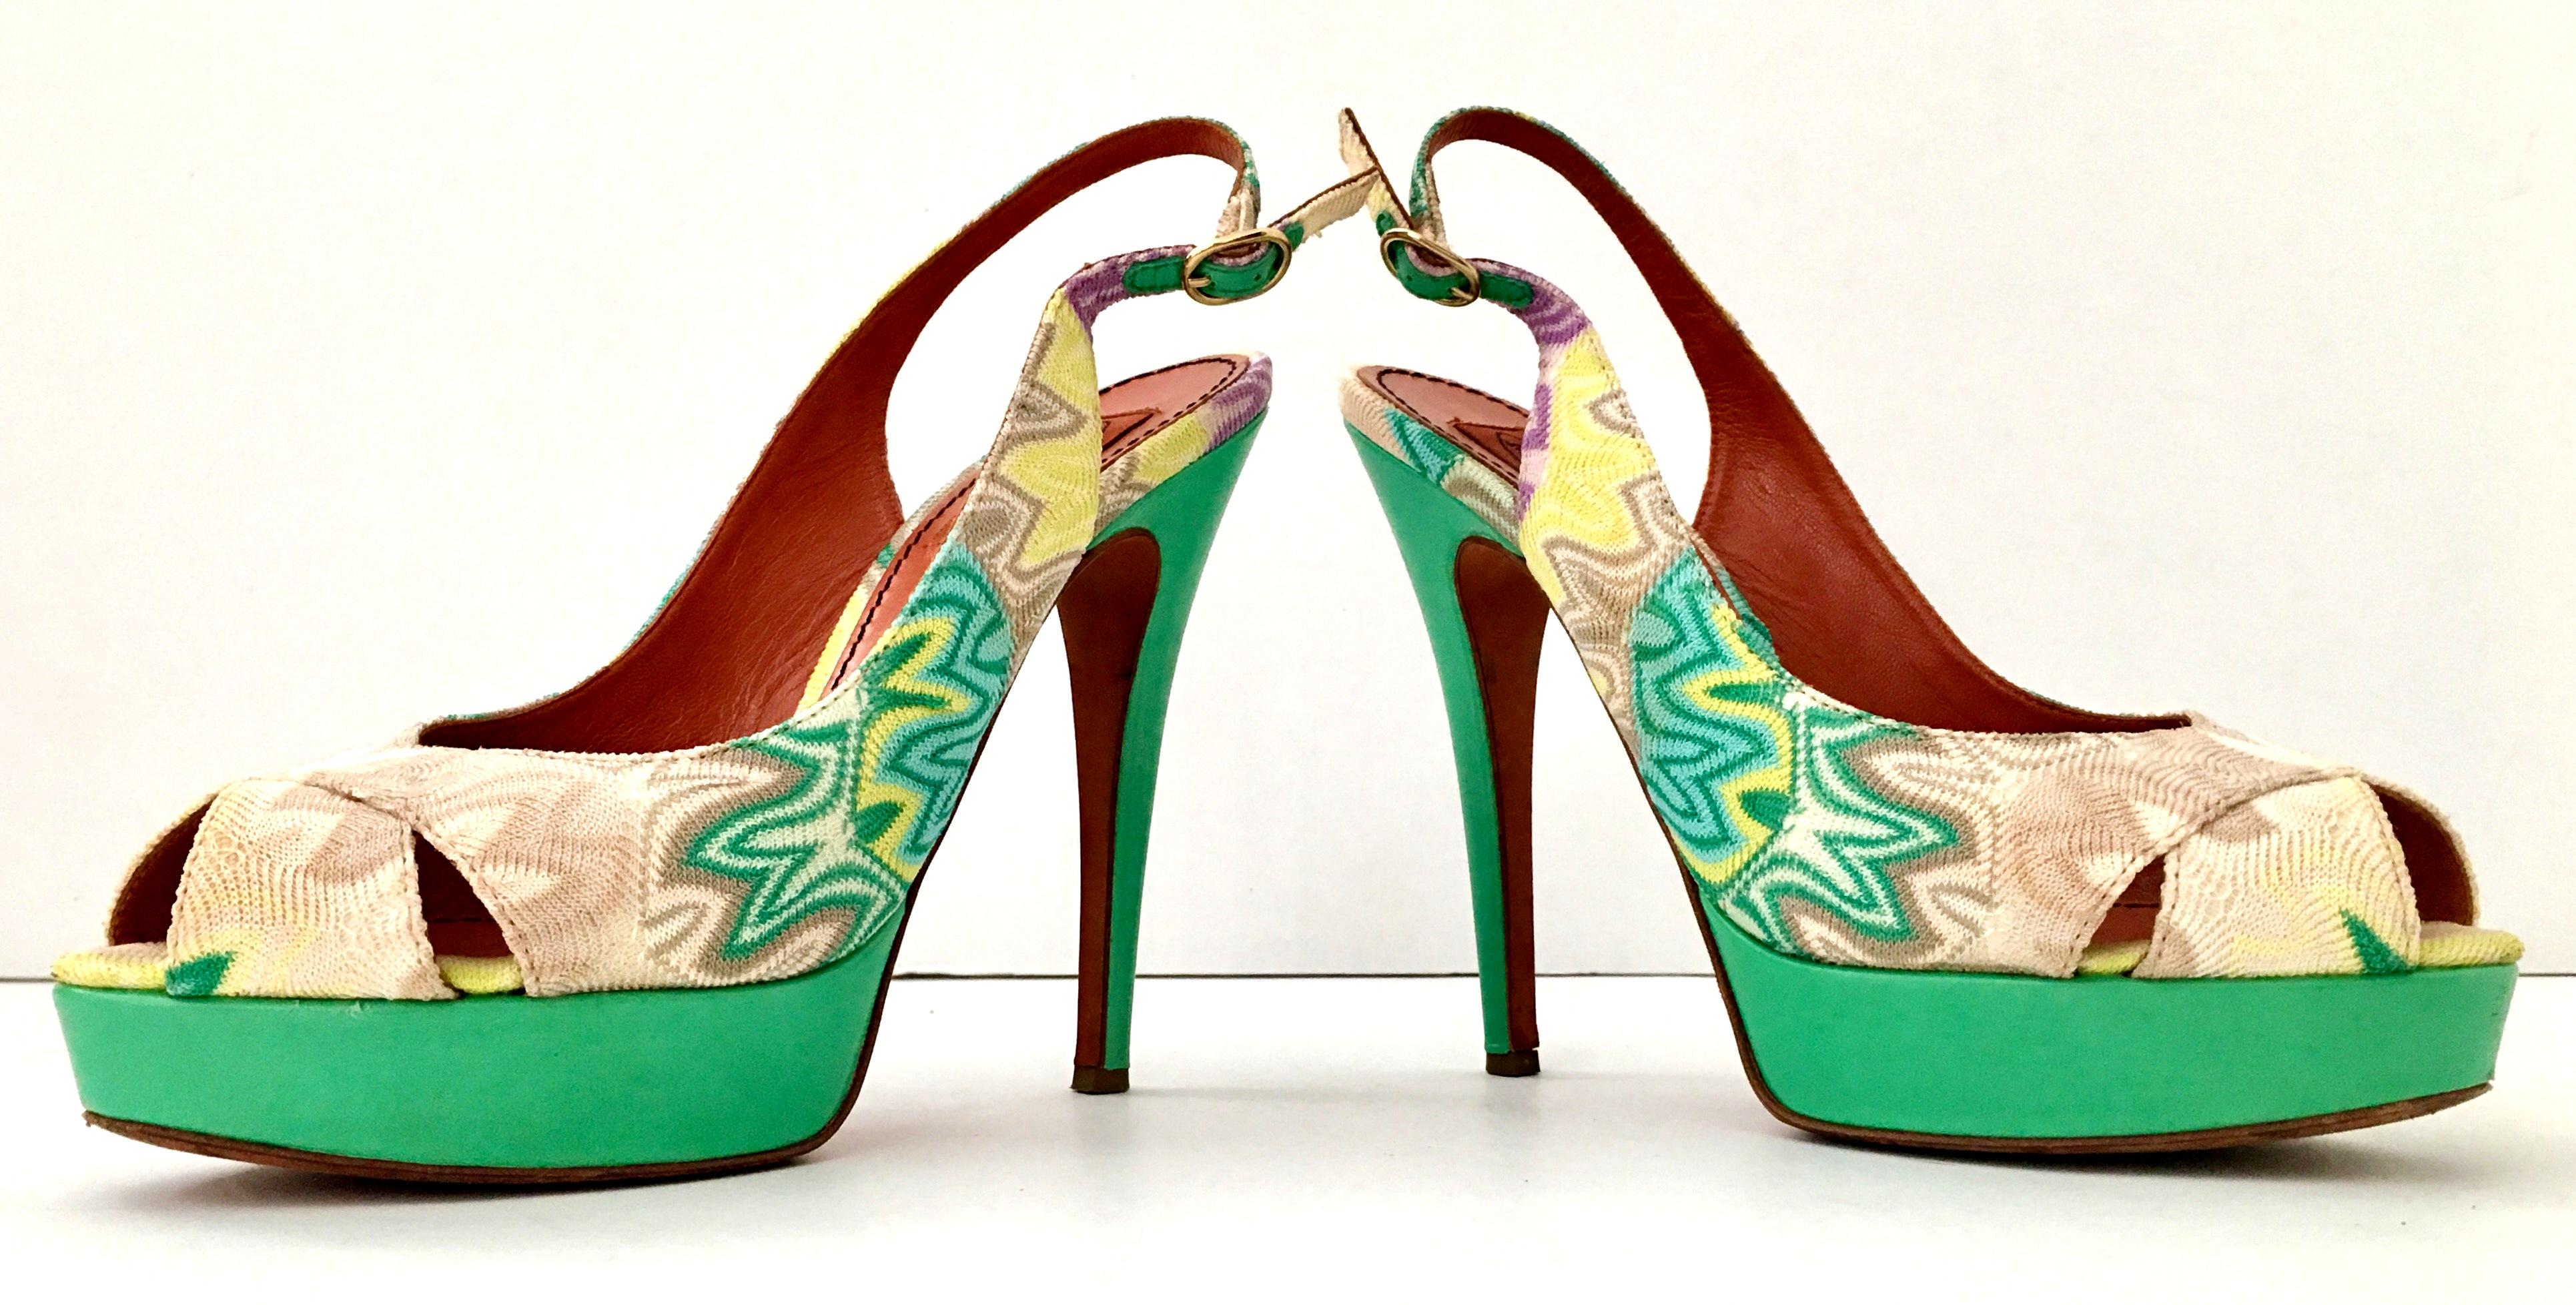 Contemporary & New Aqua leather heel chevron fabric peep toe sling back platform shoes By, Missoni. These never worn but for a runway show platform sandals feature, vivid aqua leather with multi color iconic 